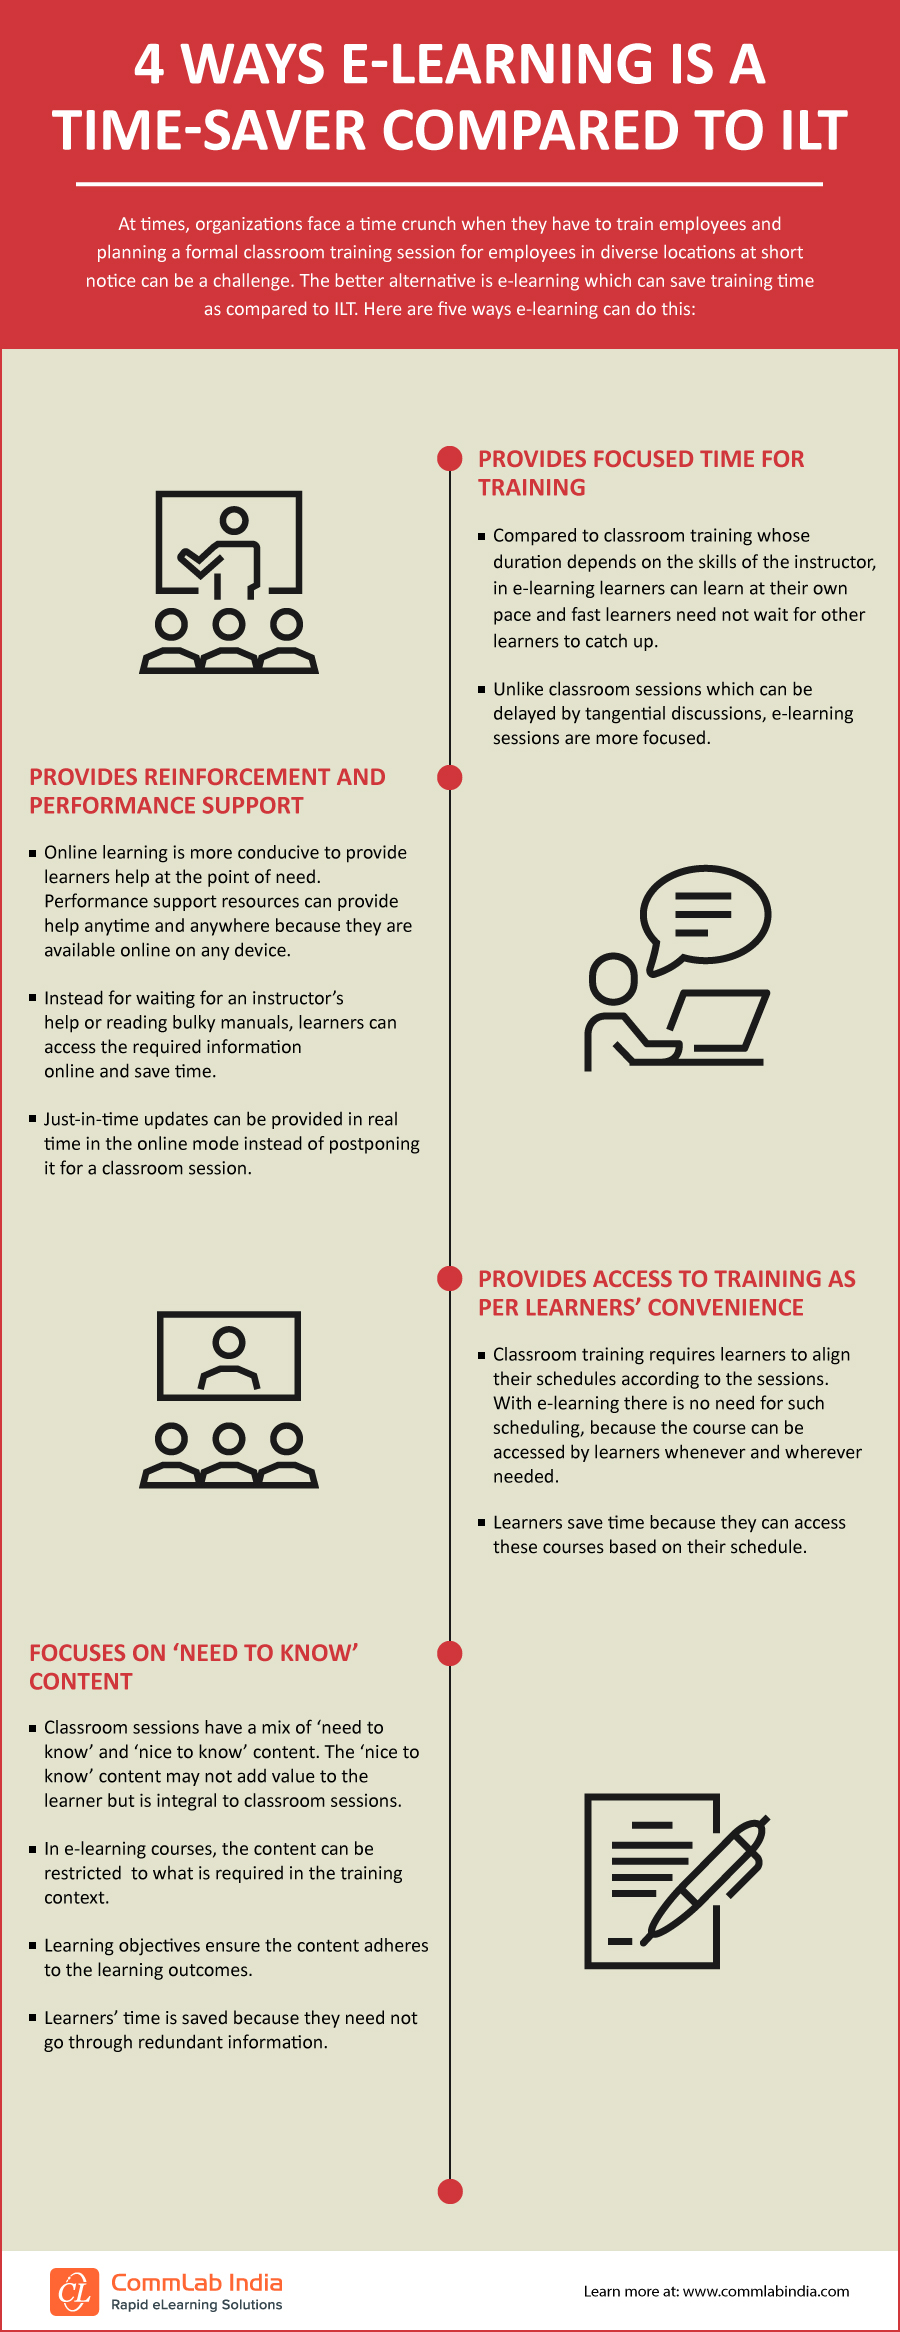 4 Ways E-learning is a Time-saver Compared to ILT [Infographic]